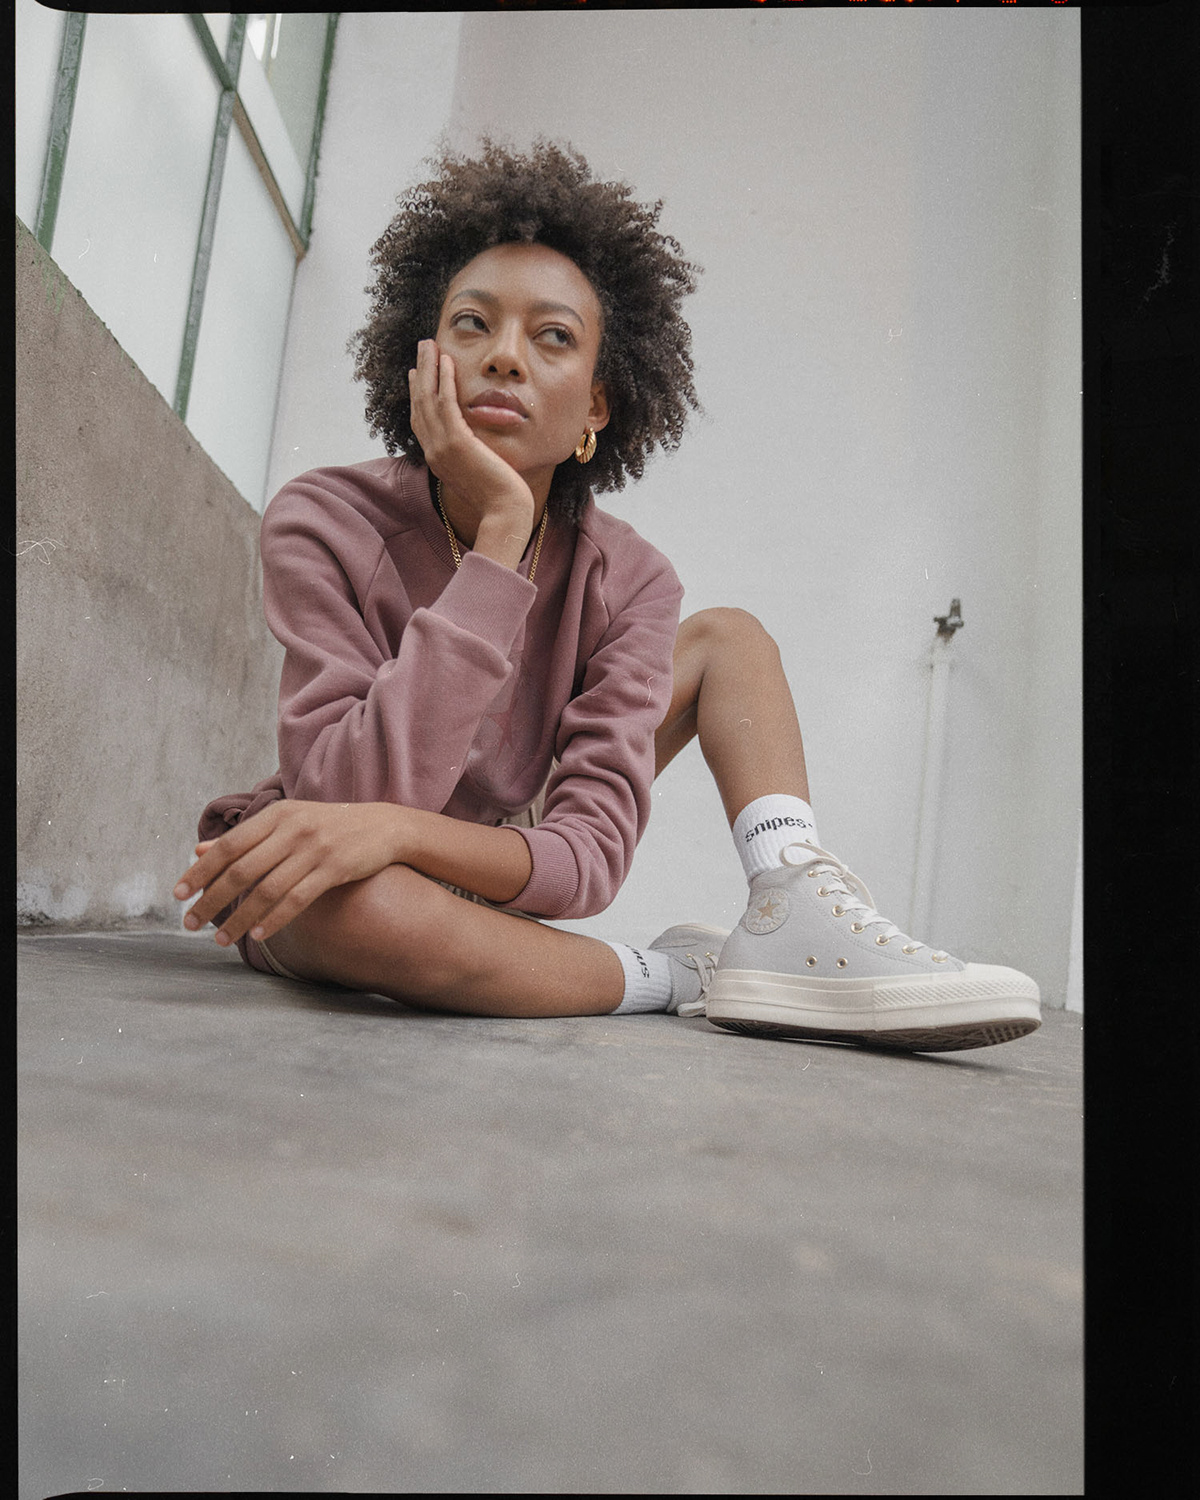 converse sneakers Fashion  beauty portrait Photography  editorial model